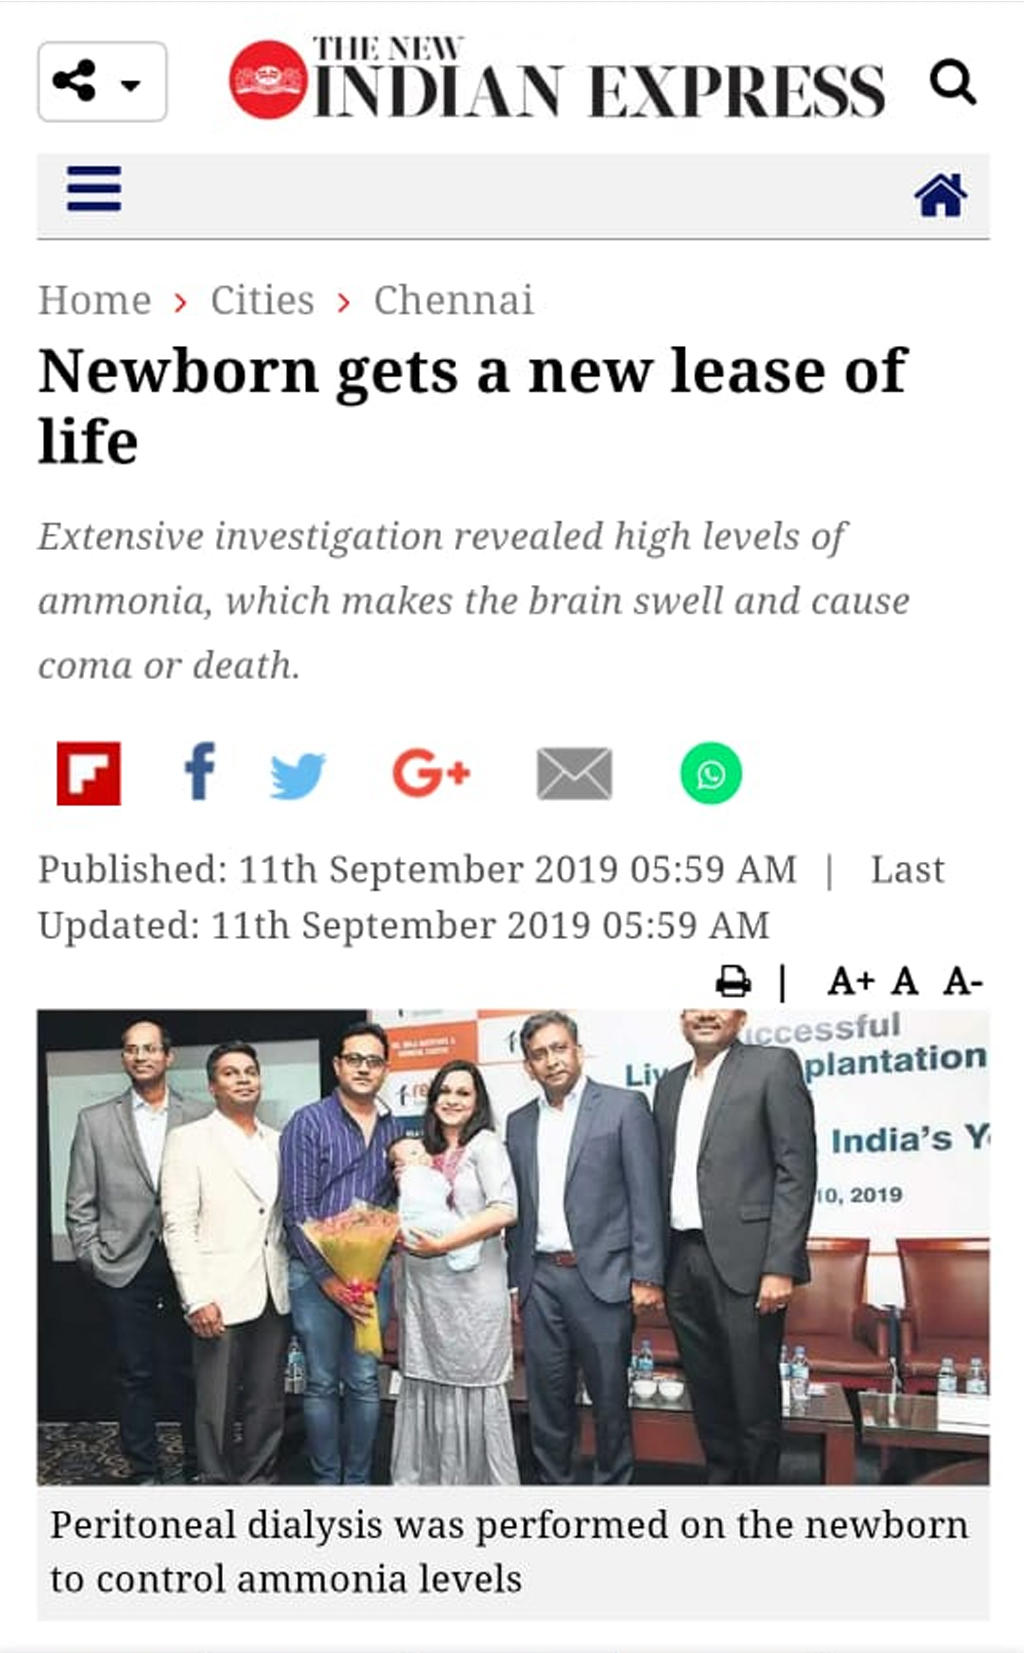 The New Indian Express - One Month Baby Successful Liver Transplantation